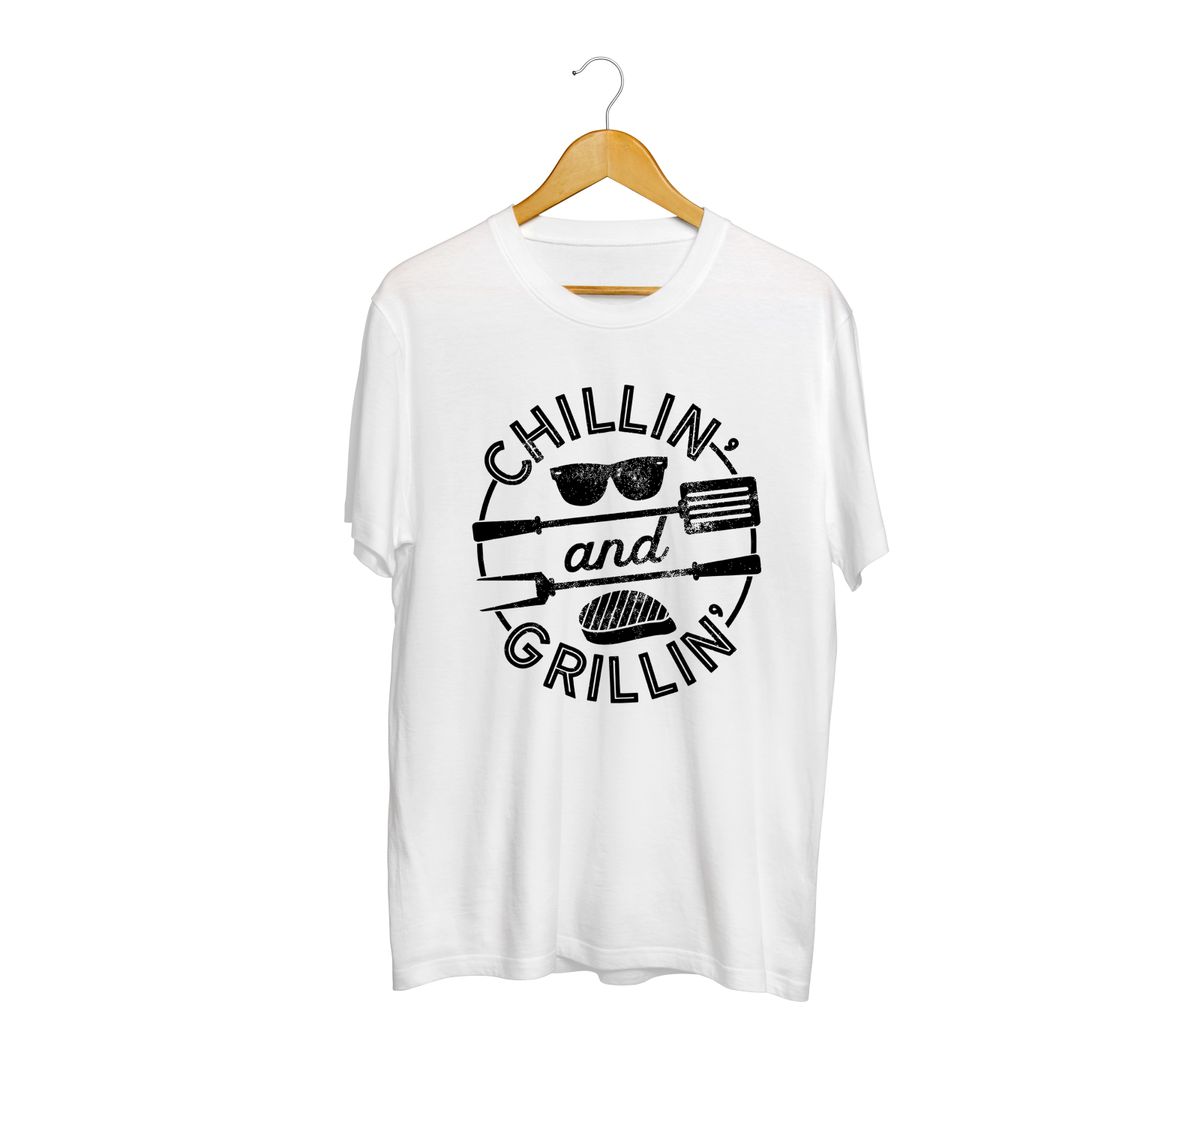 Fan Made Fits Barbeque White Chillin T-Shirt image 1